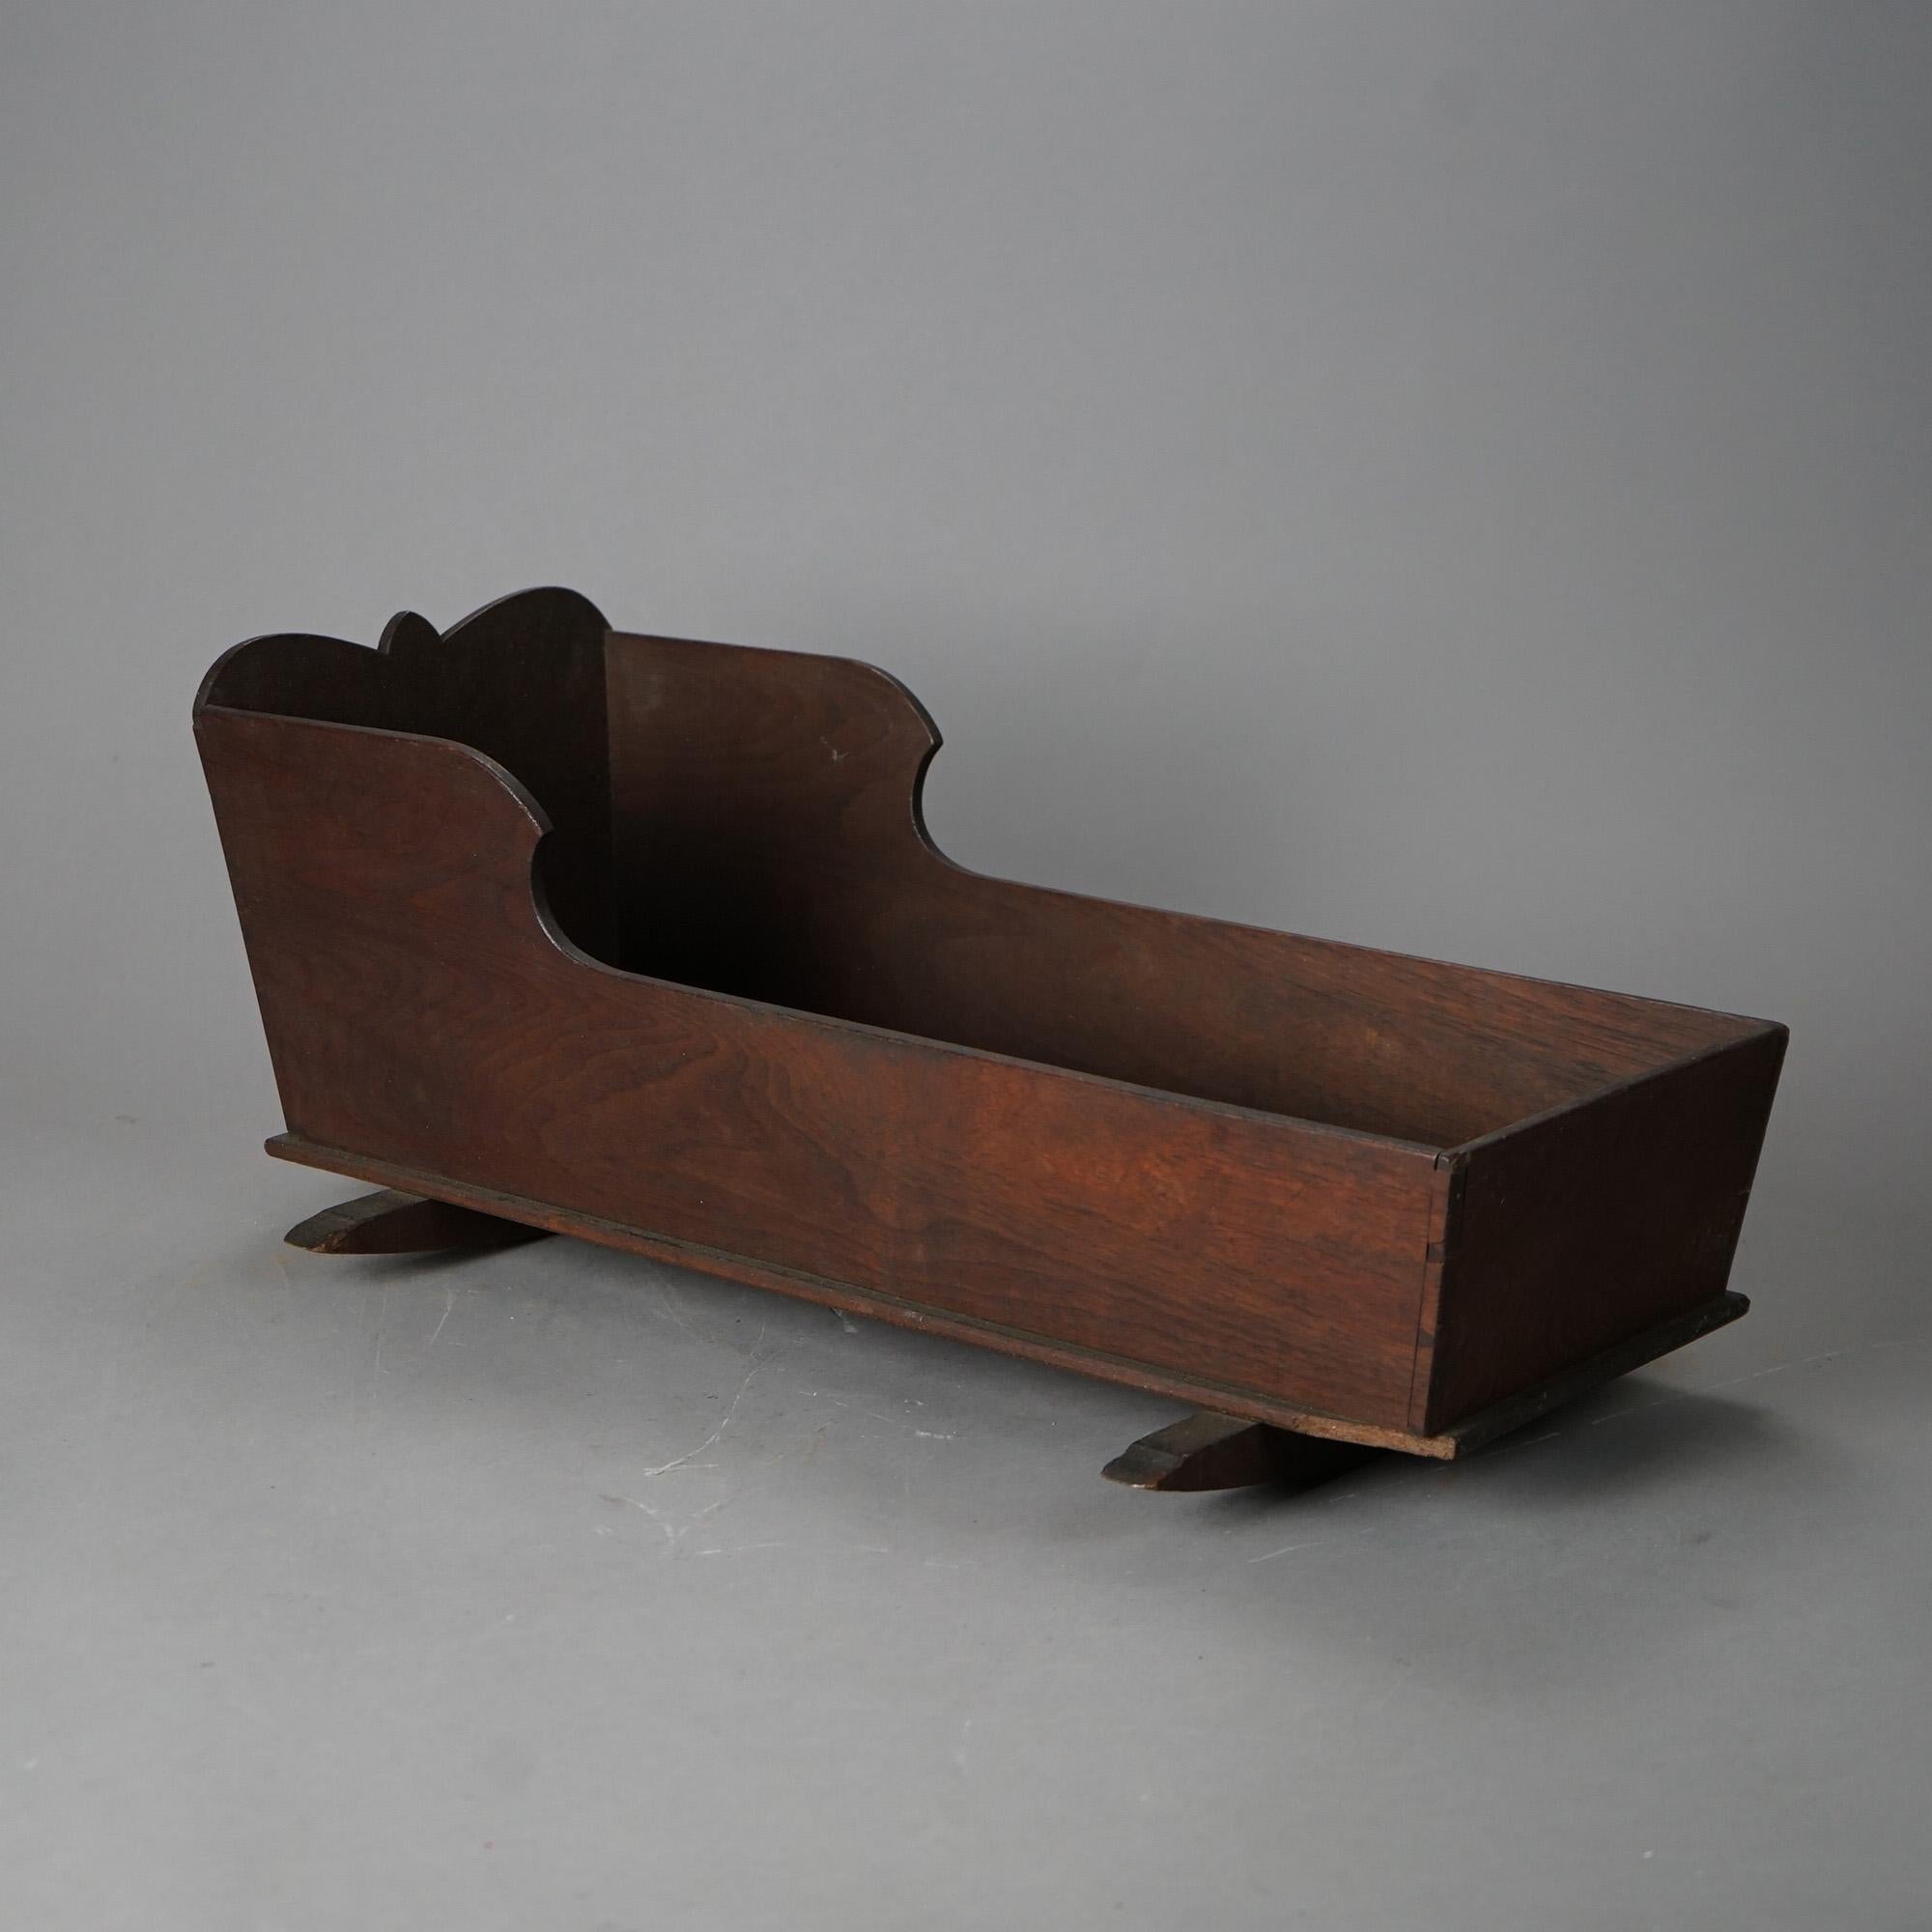 An antique primitive doll cradle offers walnut construction with shaped backboard, c1850

Measures - 9.25